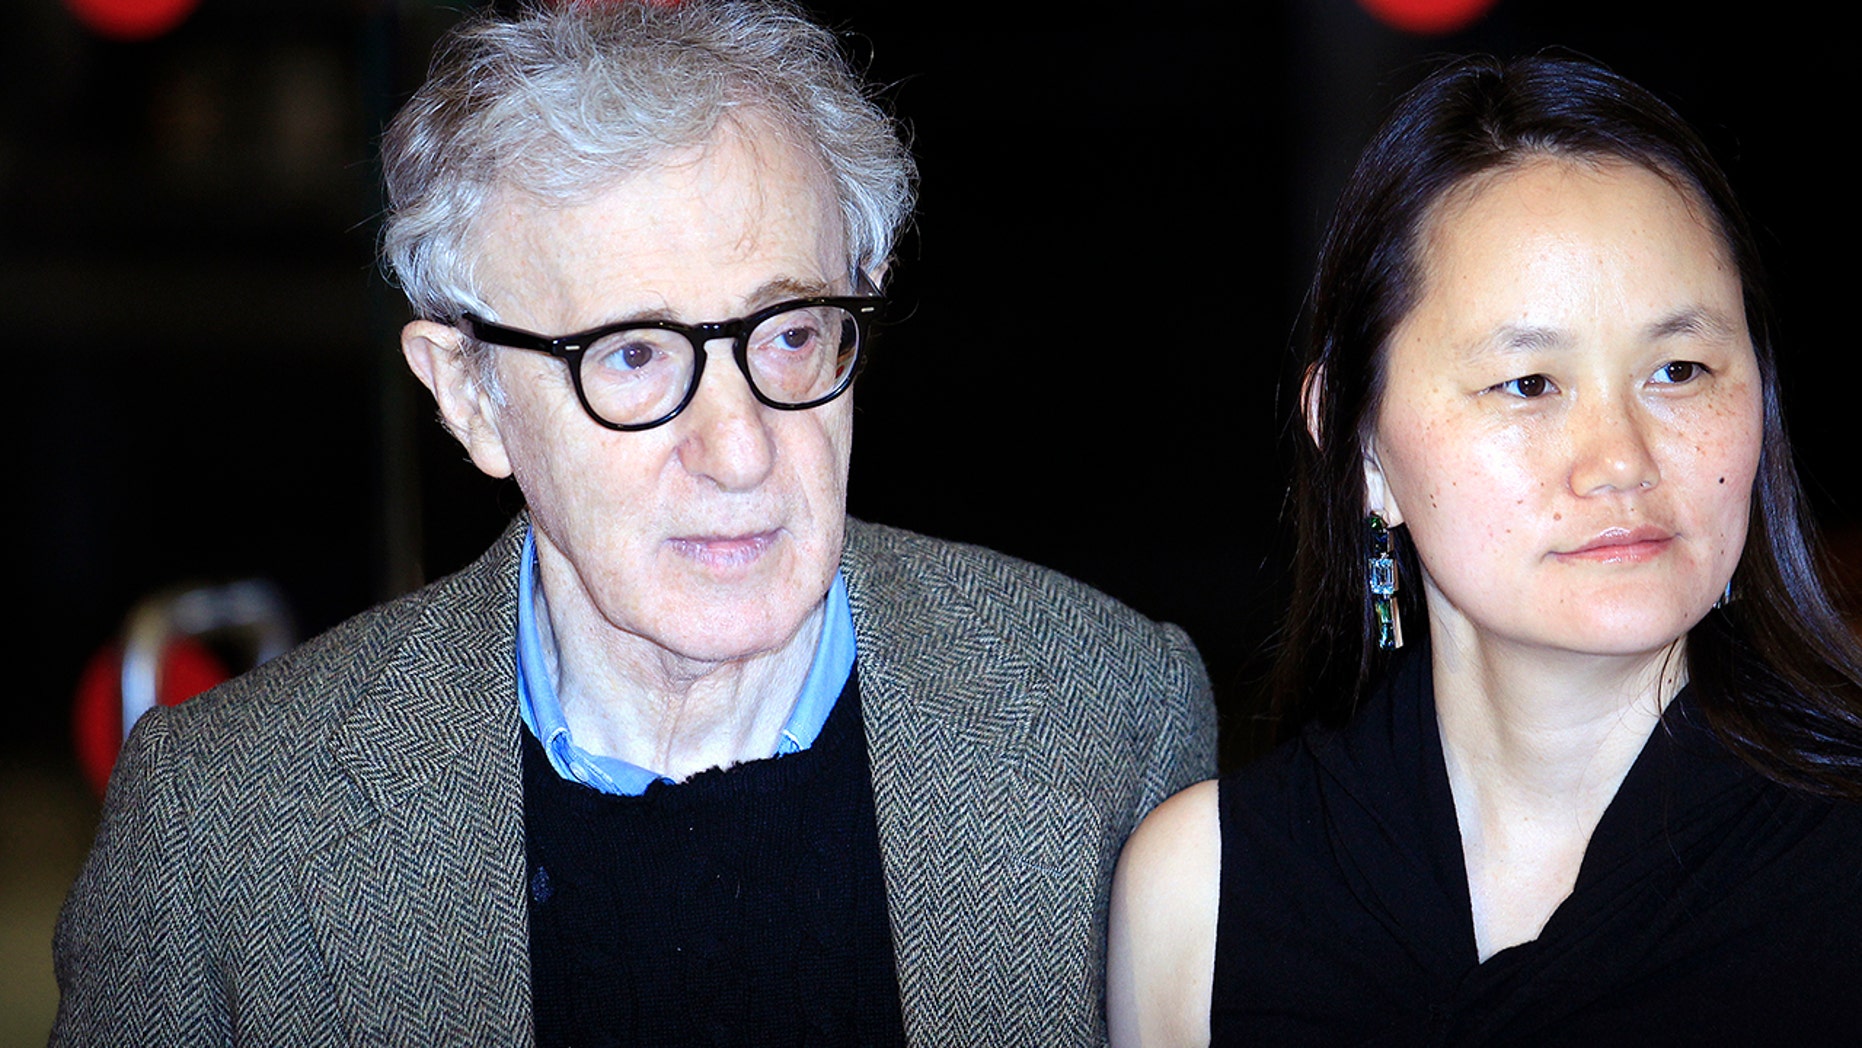 Woody Allen's daughter with Soon-Yi defends him against sex abuse claims | Fox News